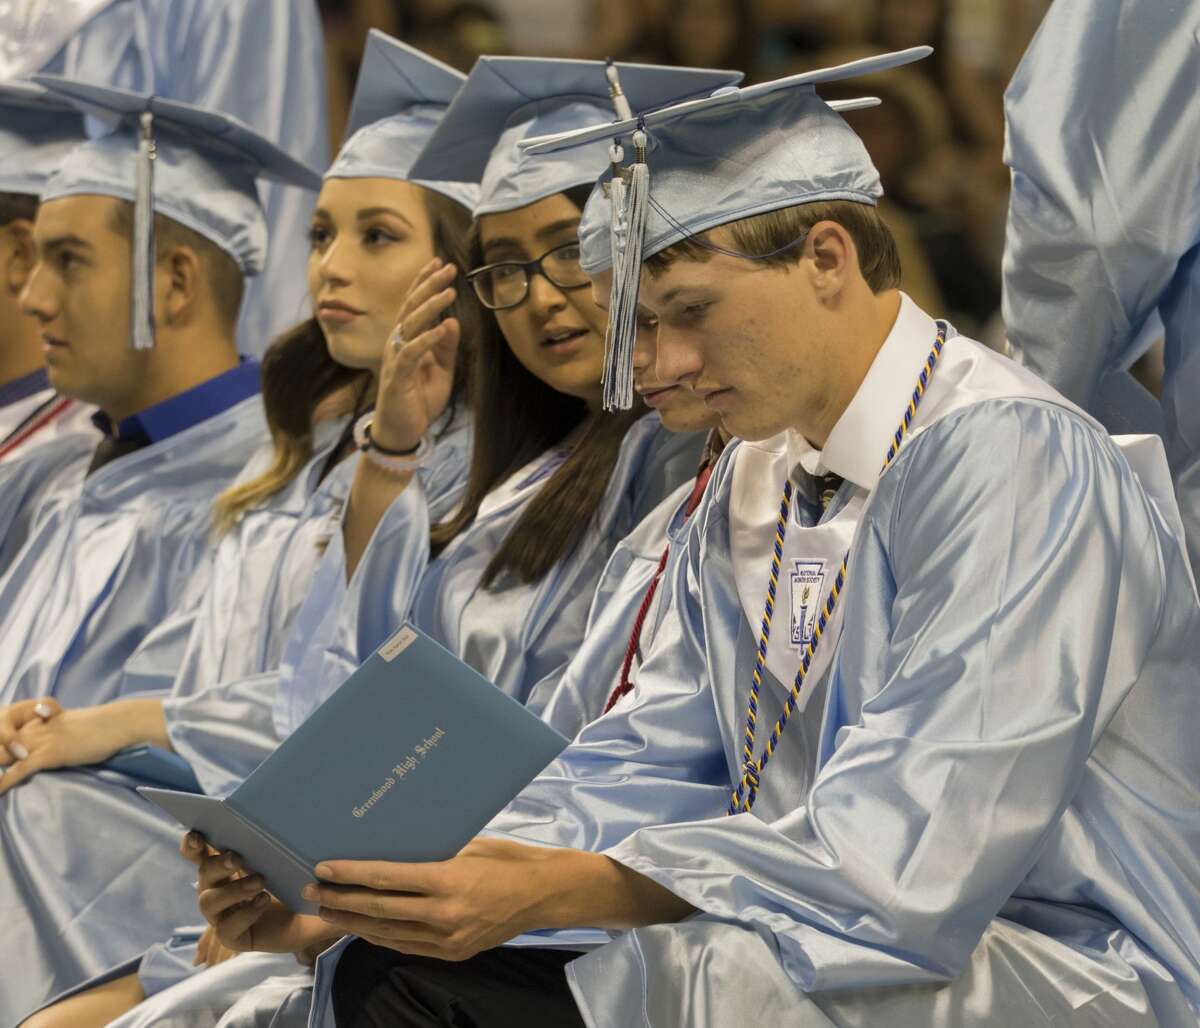 Greenwood graduates walk the stage to get their diplomas 5/25/17 at the Chaparral Center. Tim Fischer/Reporter-Telegram